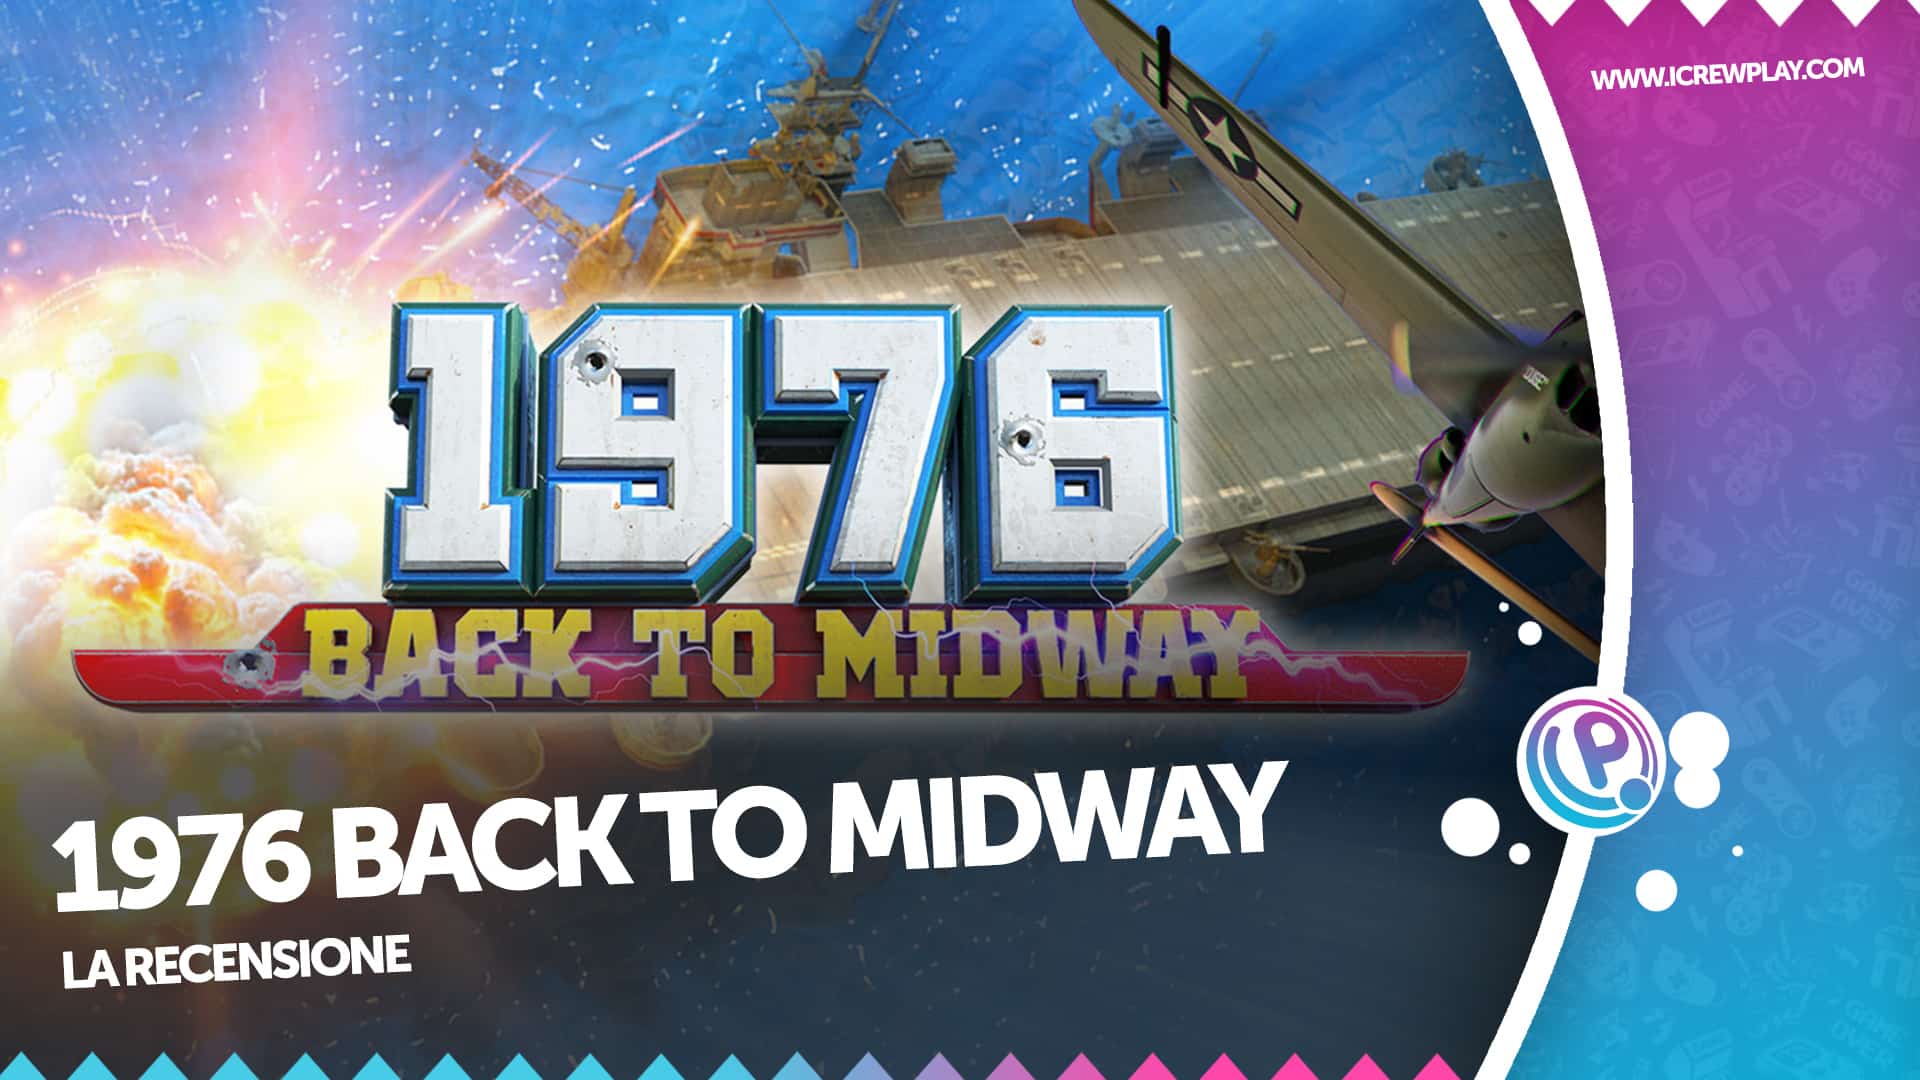 1976 Back to Midway